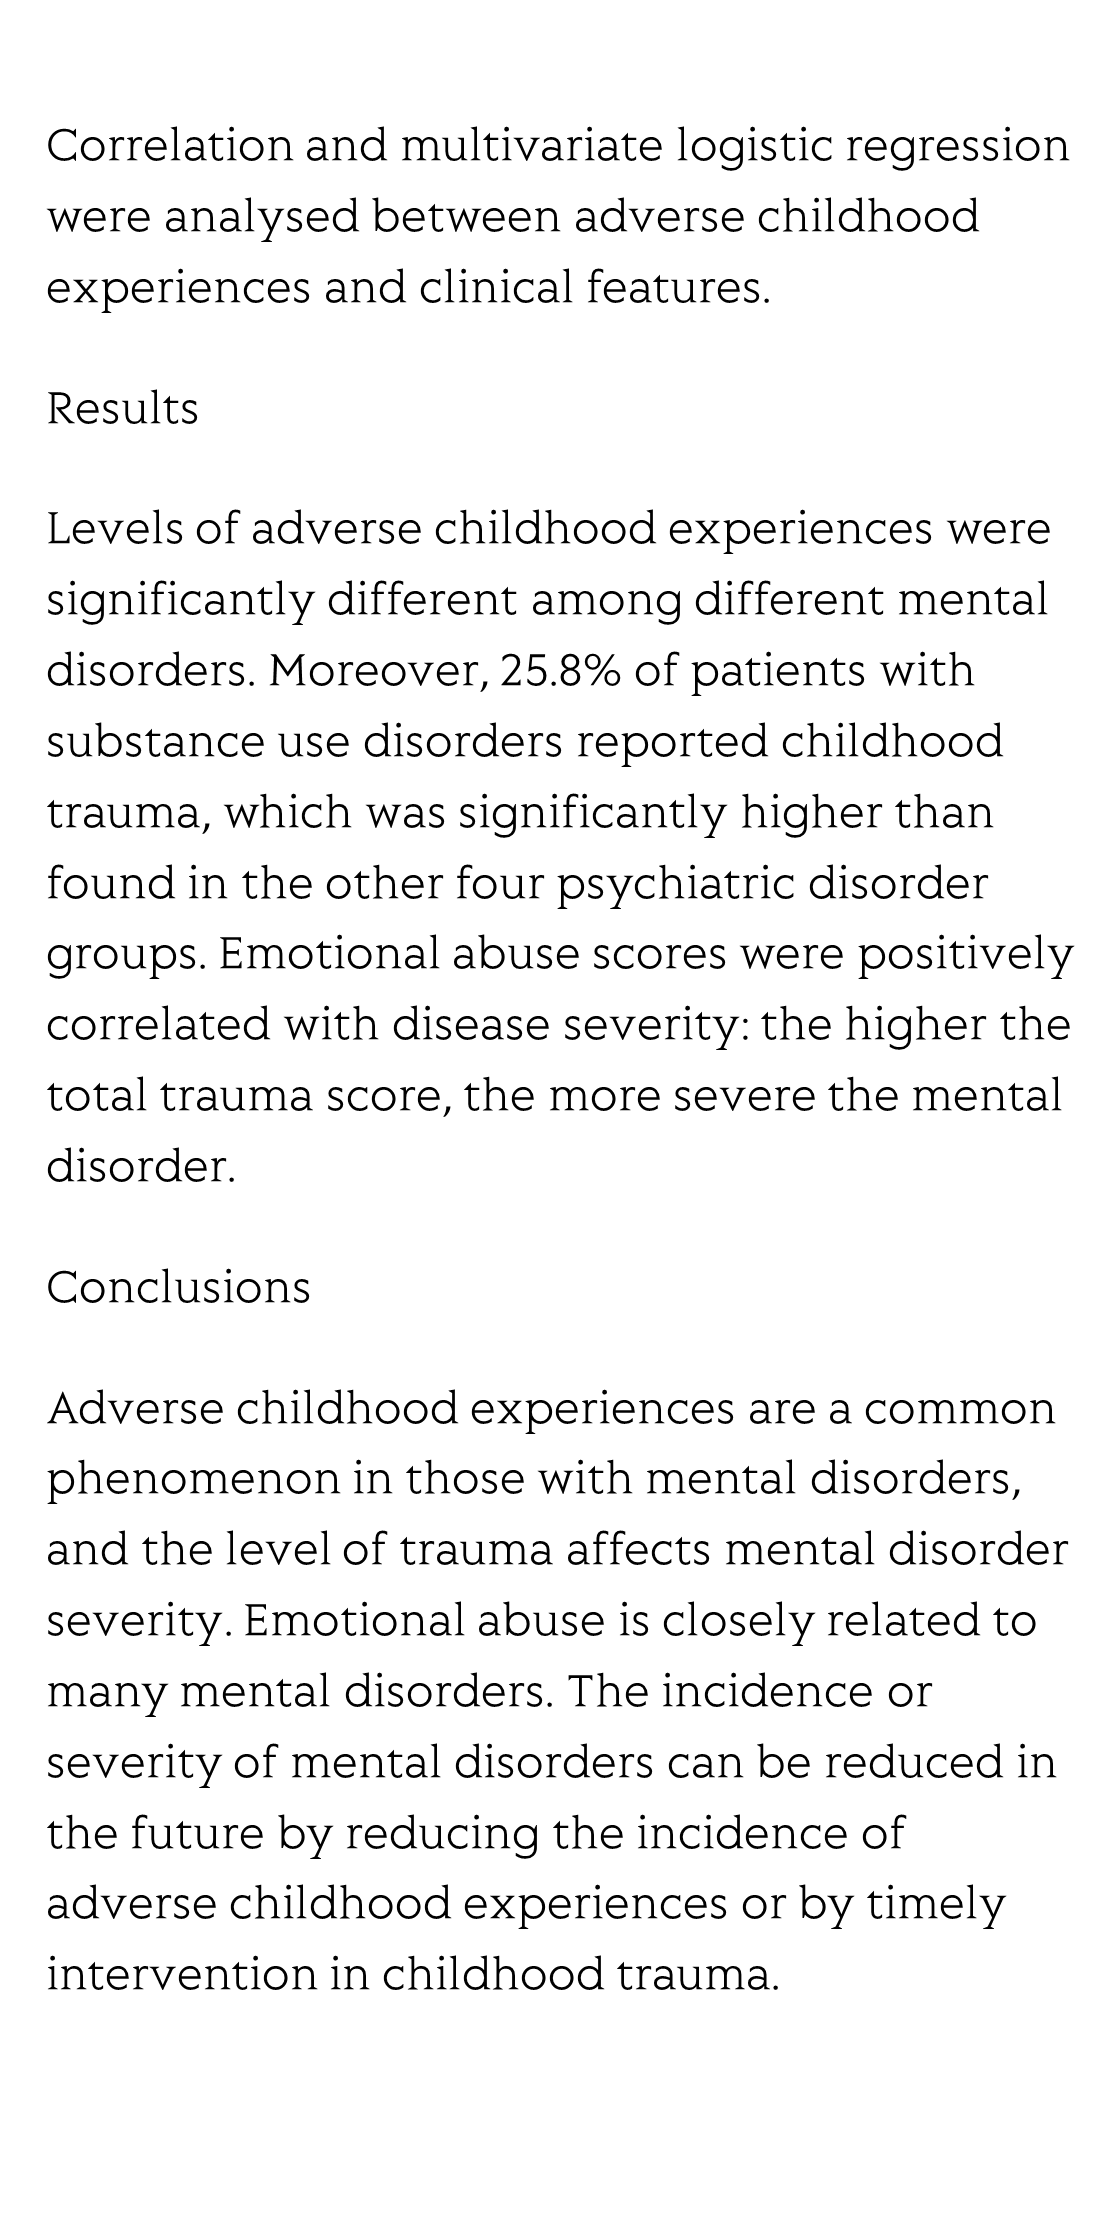 Impact of adverse childhood experiences on the symptom severity of different mental disorders: a cross-diagnostic study_3